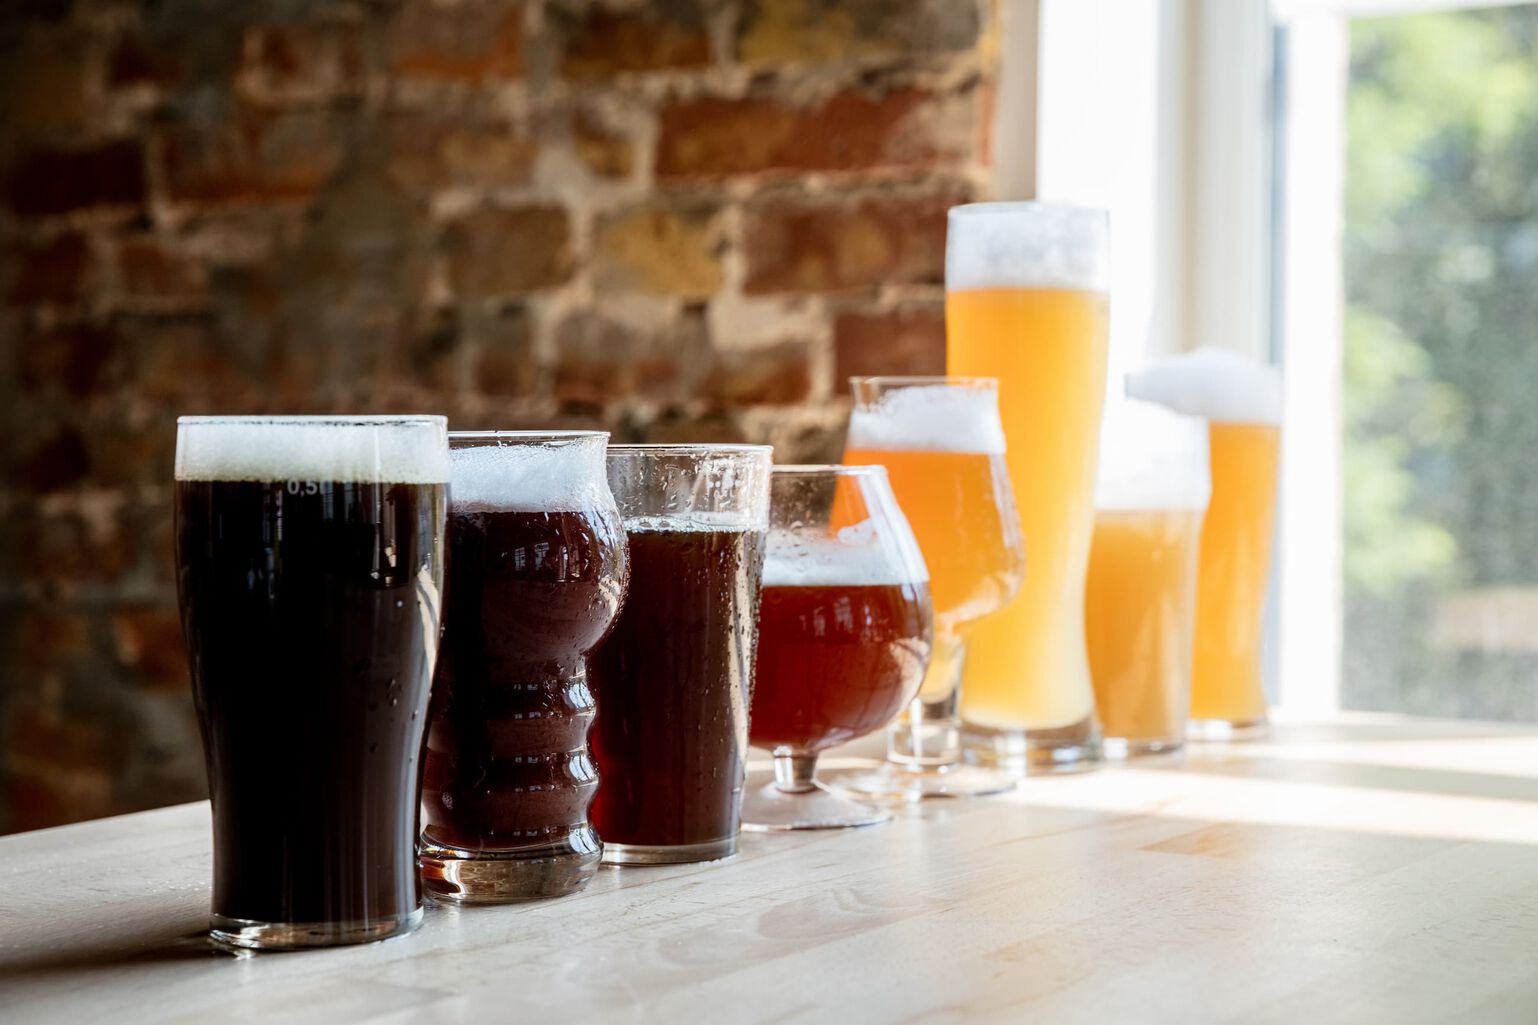 8 styles of beer are lined up from darkest to lightest color classification